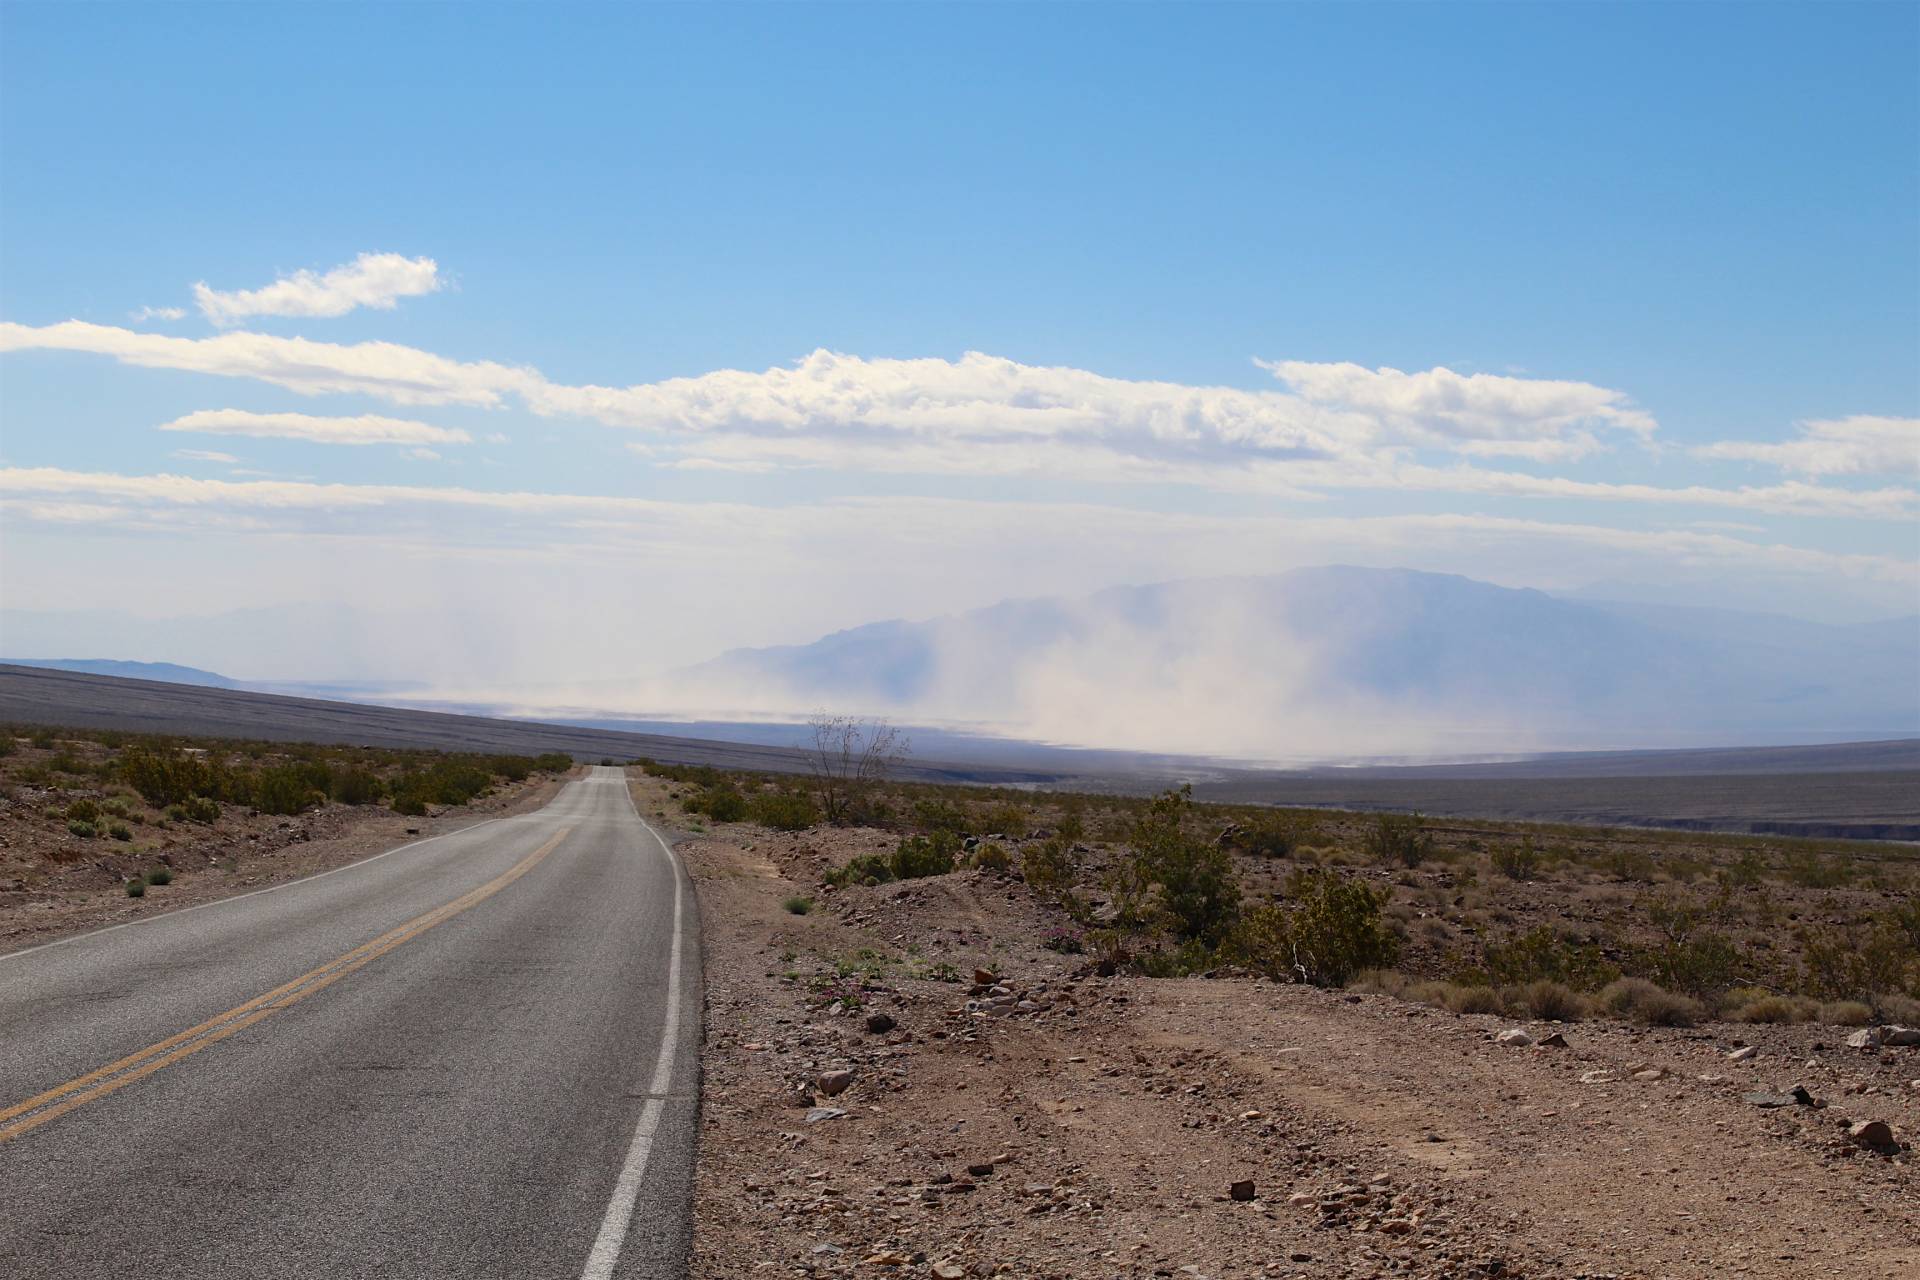 A dust storm along the Scotty's Castle Road, Death Valley National Park, California